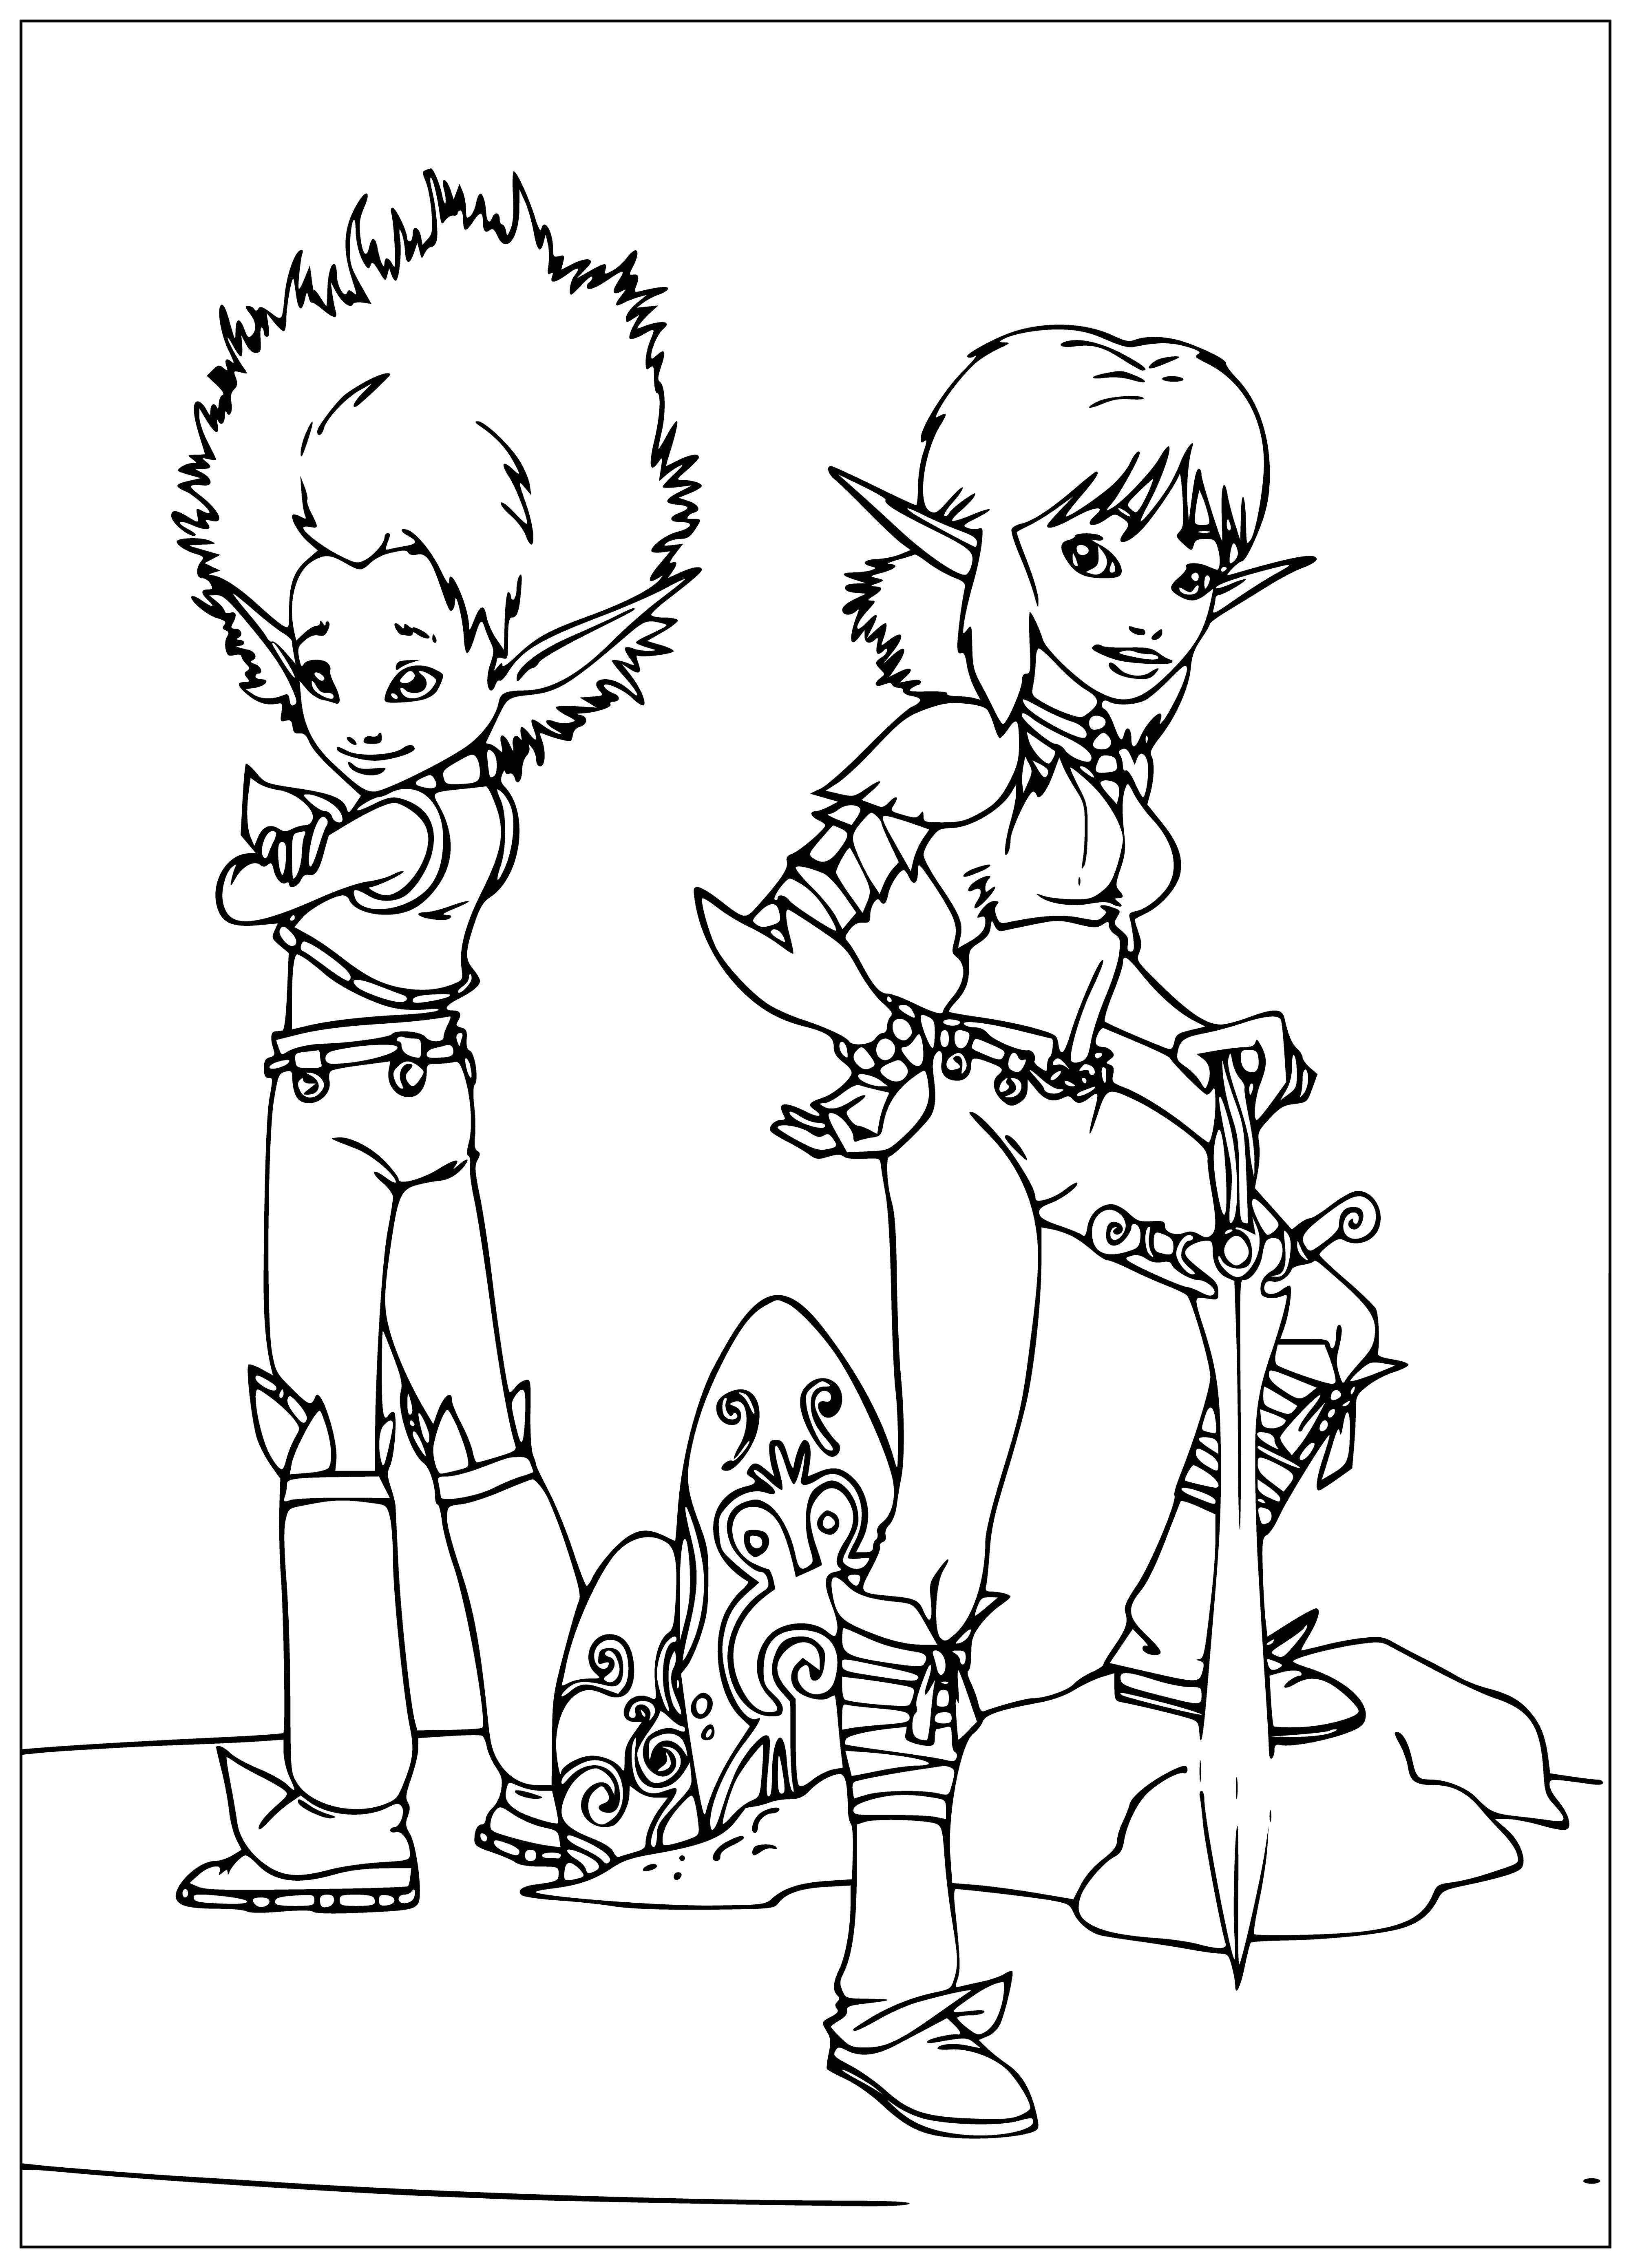 coloring page: Boy Arthur & girl Selenia lean in, deep in conversation. Arthur in white/blue; Selenia in white dress. Plant behind them.